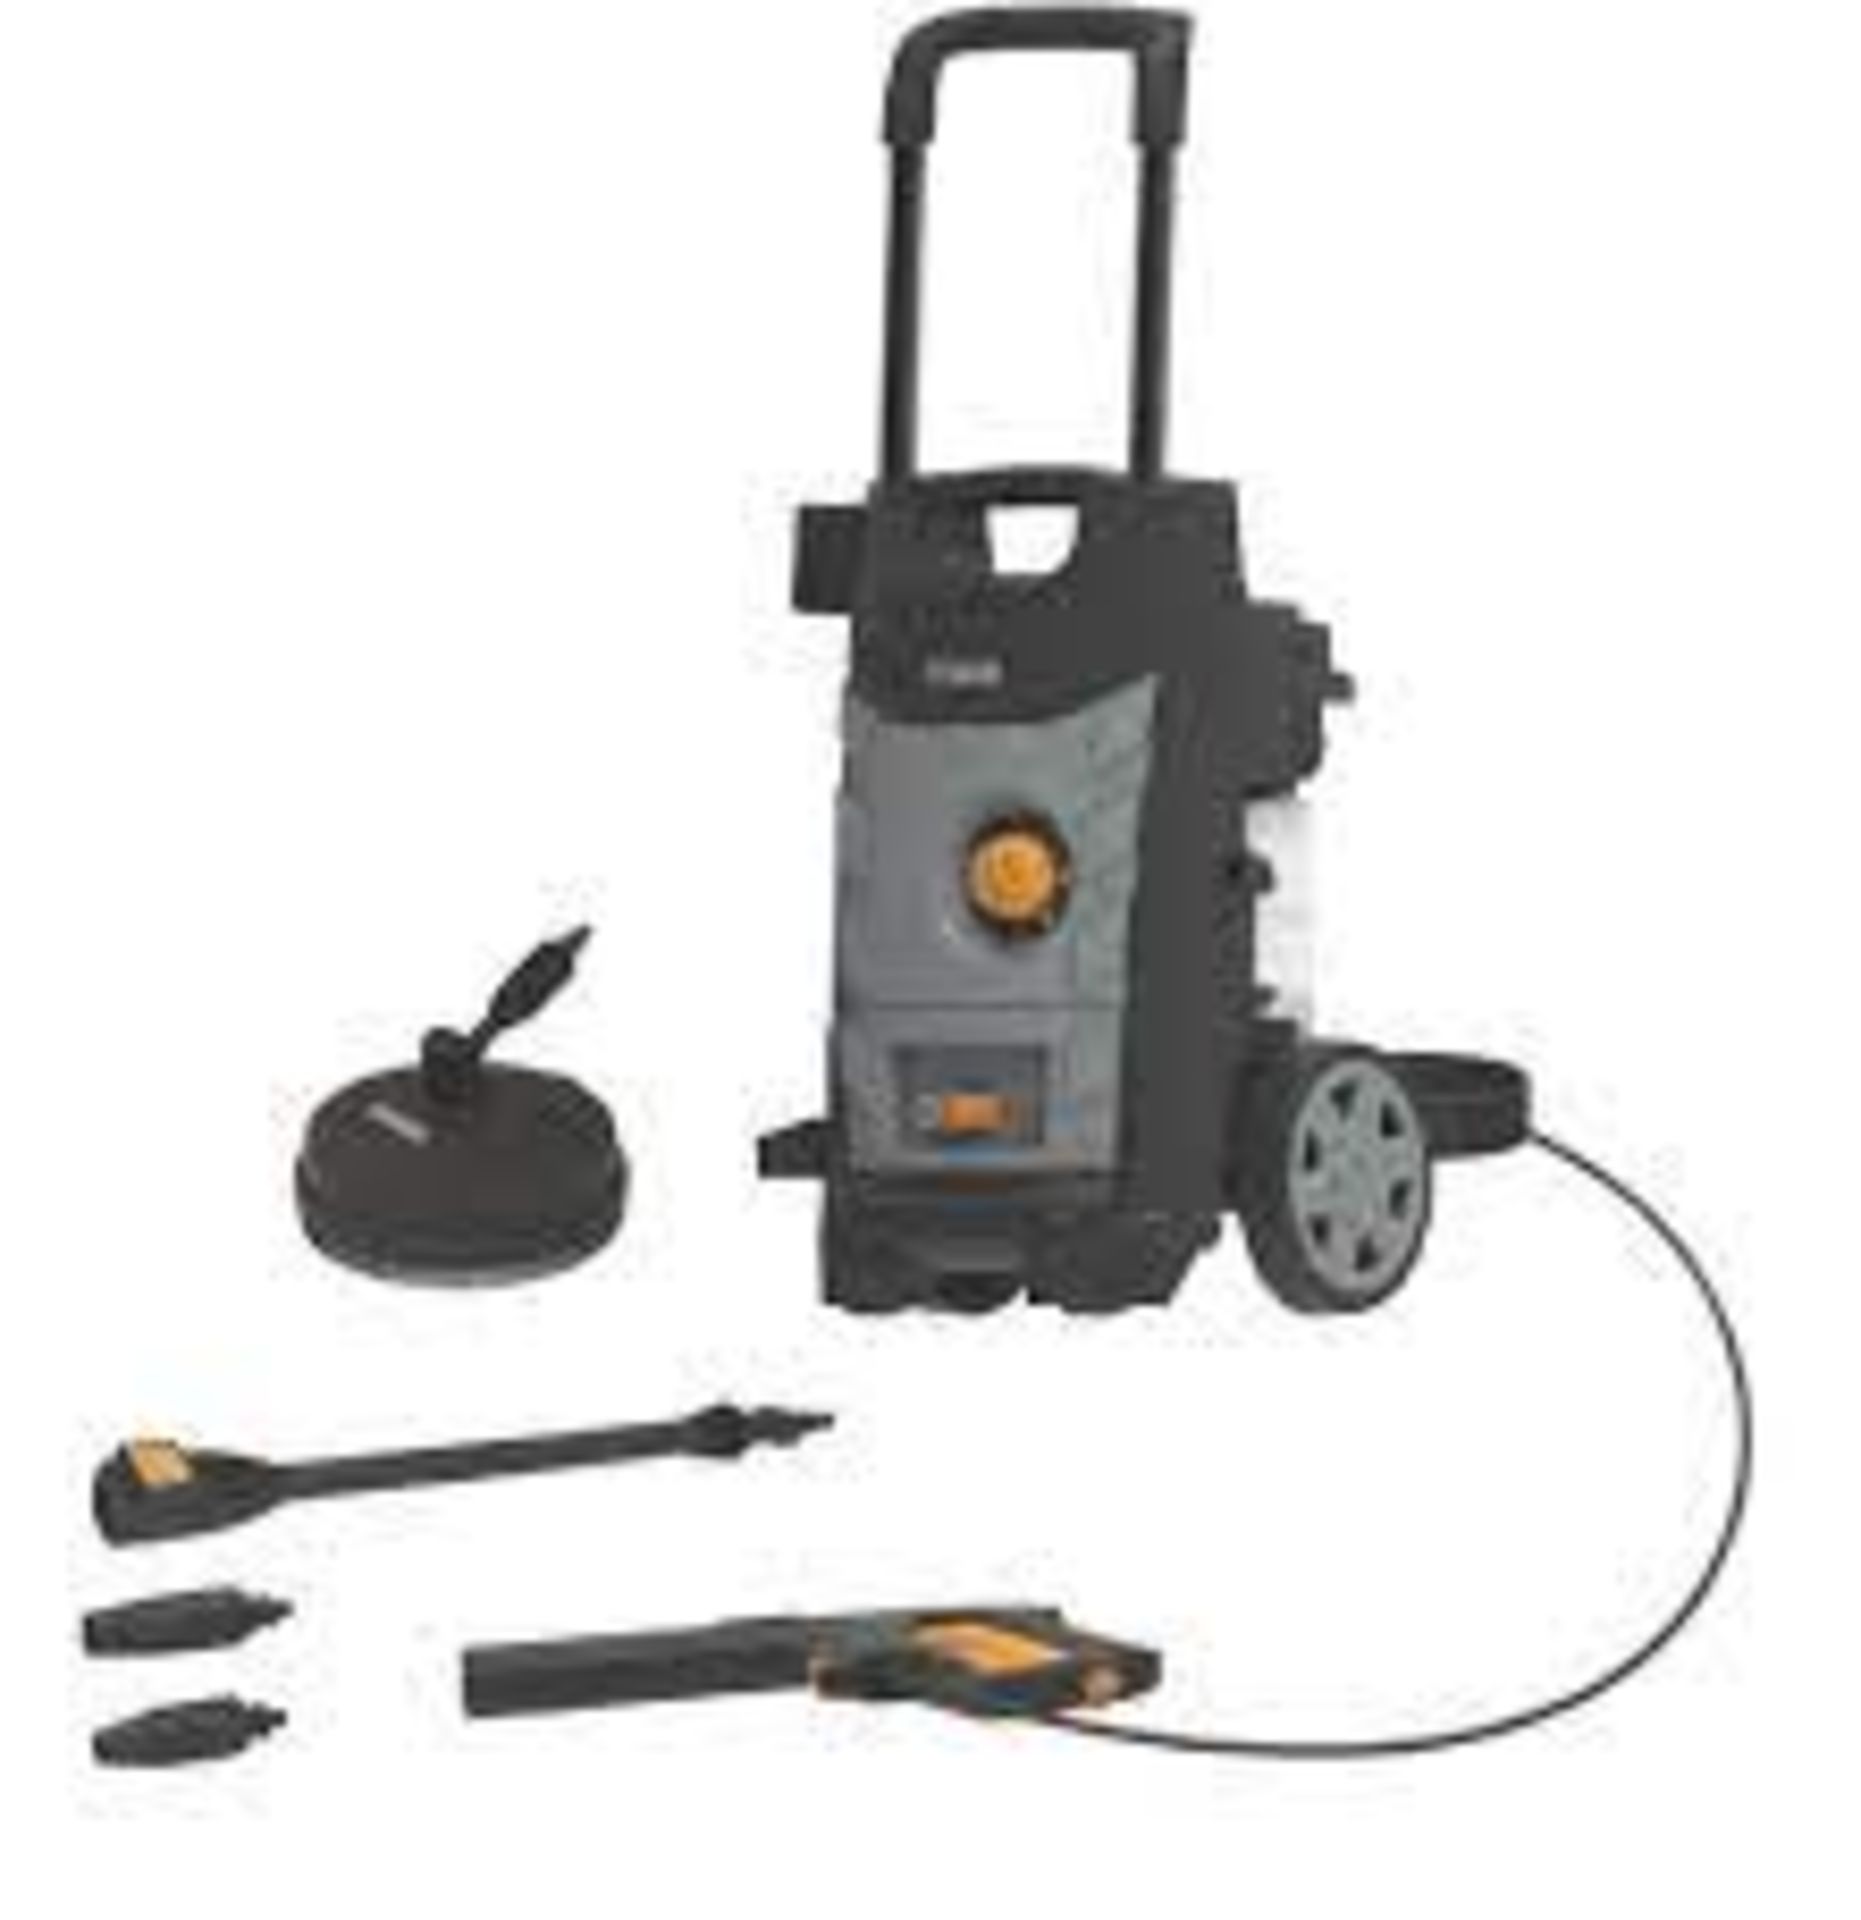 TITAN TTB1800PRW 140BAR ELECTRIC HIGH PRESSURE WASHER 1.8KW 230V. - P3. Compact design with space-